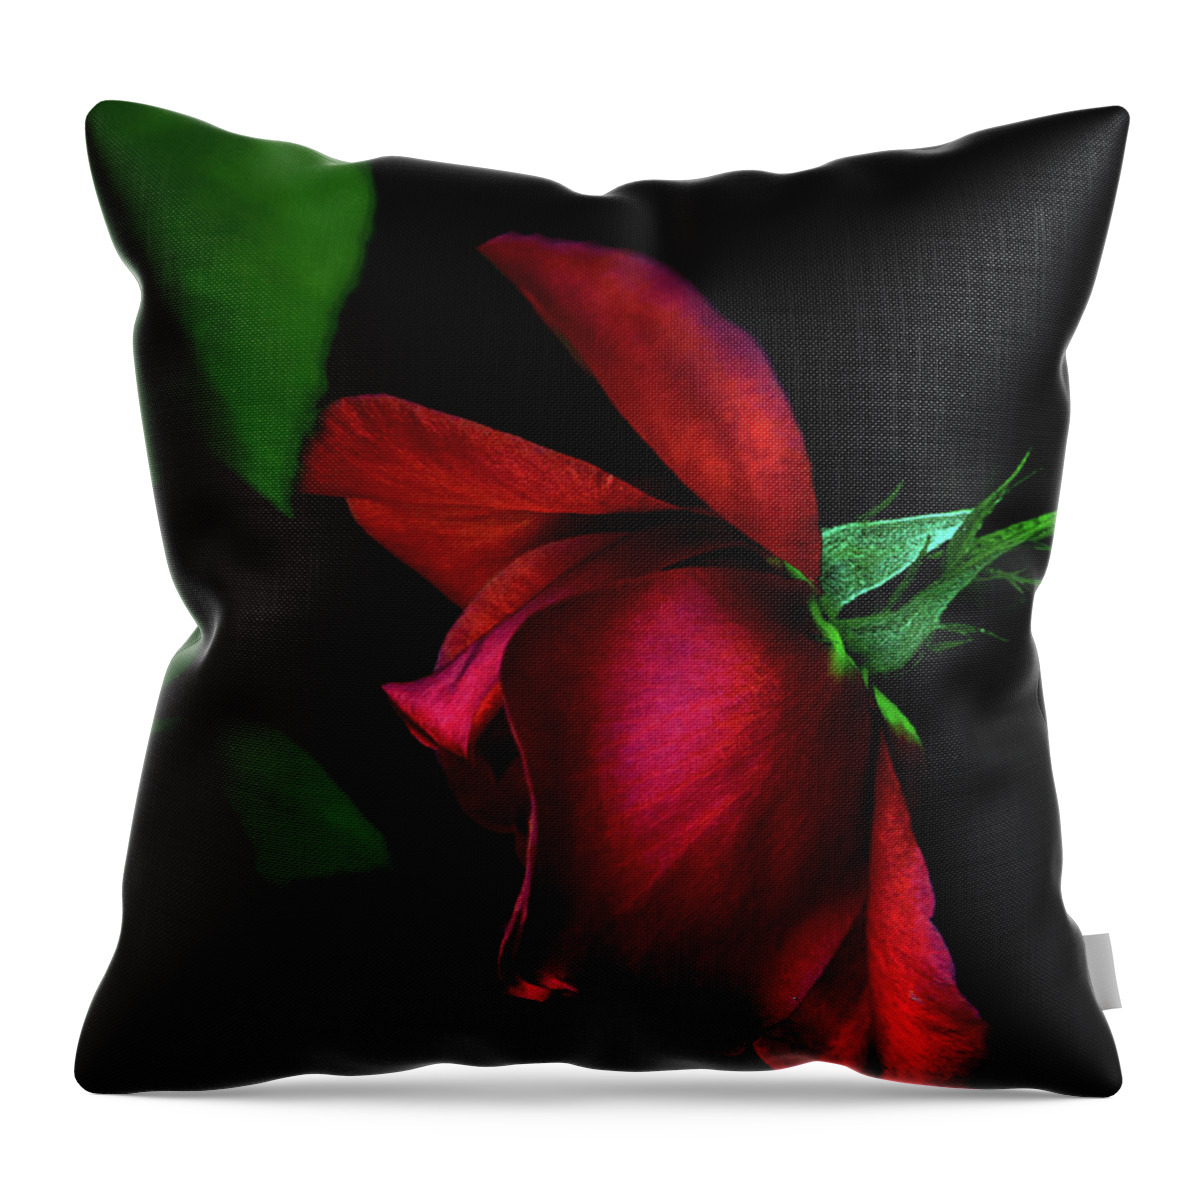 California Throw Pillow featuring the photograph Red beauty by Camille Lopez